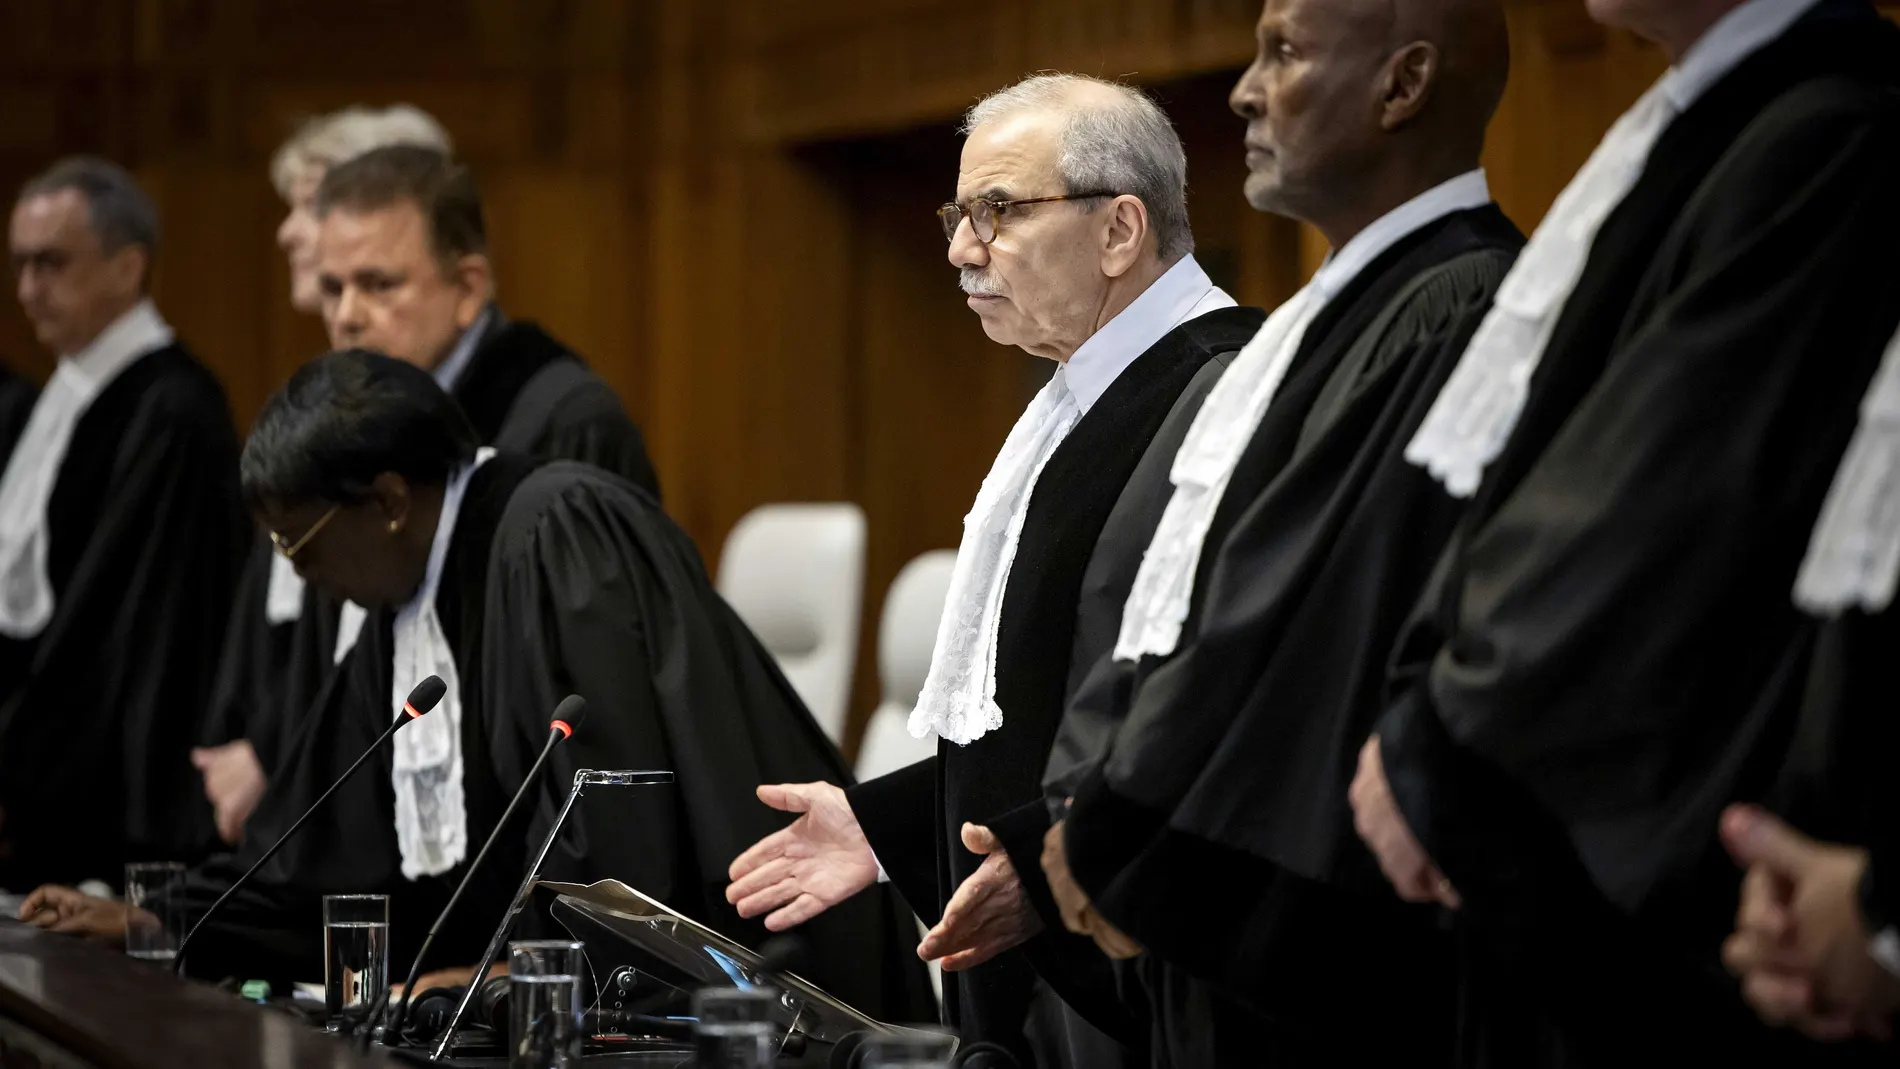 The Hague (Netherlands), 24/05/2024.- International Court of Justice (ICJ) President Nawaf Salam (C) stands during an ICJ ruling over the situation in Rafah, southern Gaza Strip, in the Hague, Netherlands, 24 May 2024. The ICJ on 24 May ordered Israel to halt its military operation in Rafah, to open the Rafah border crossing with Egypt to allow for the entry of humanitarian aid, to allow access to Gaza for investigators, and to report to the court within one month on its progress. (Egipto, Pa...